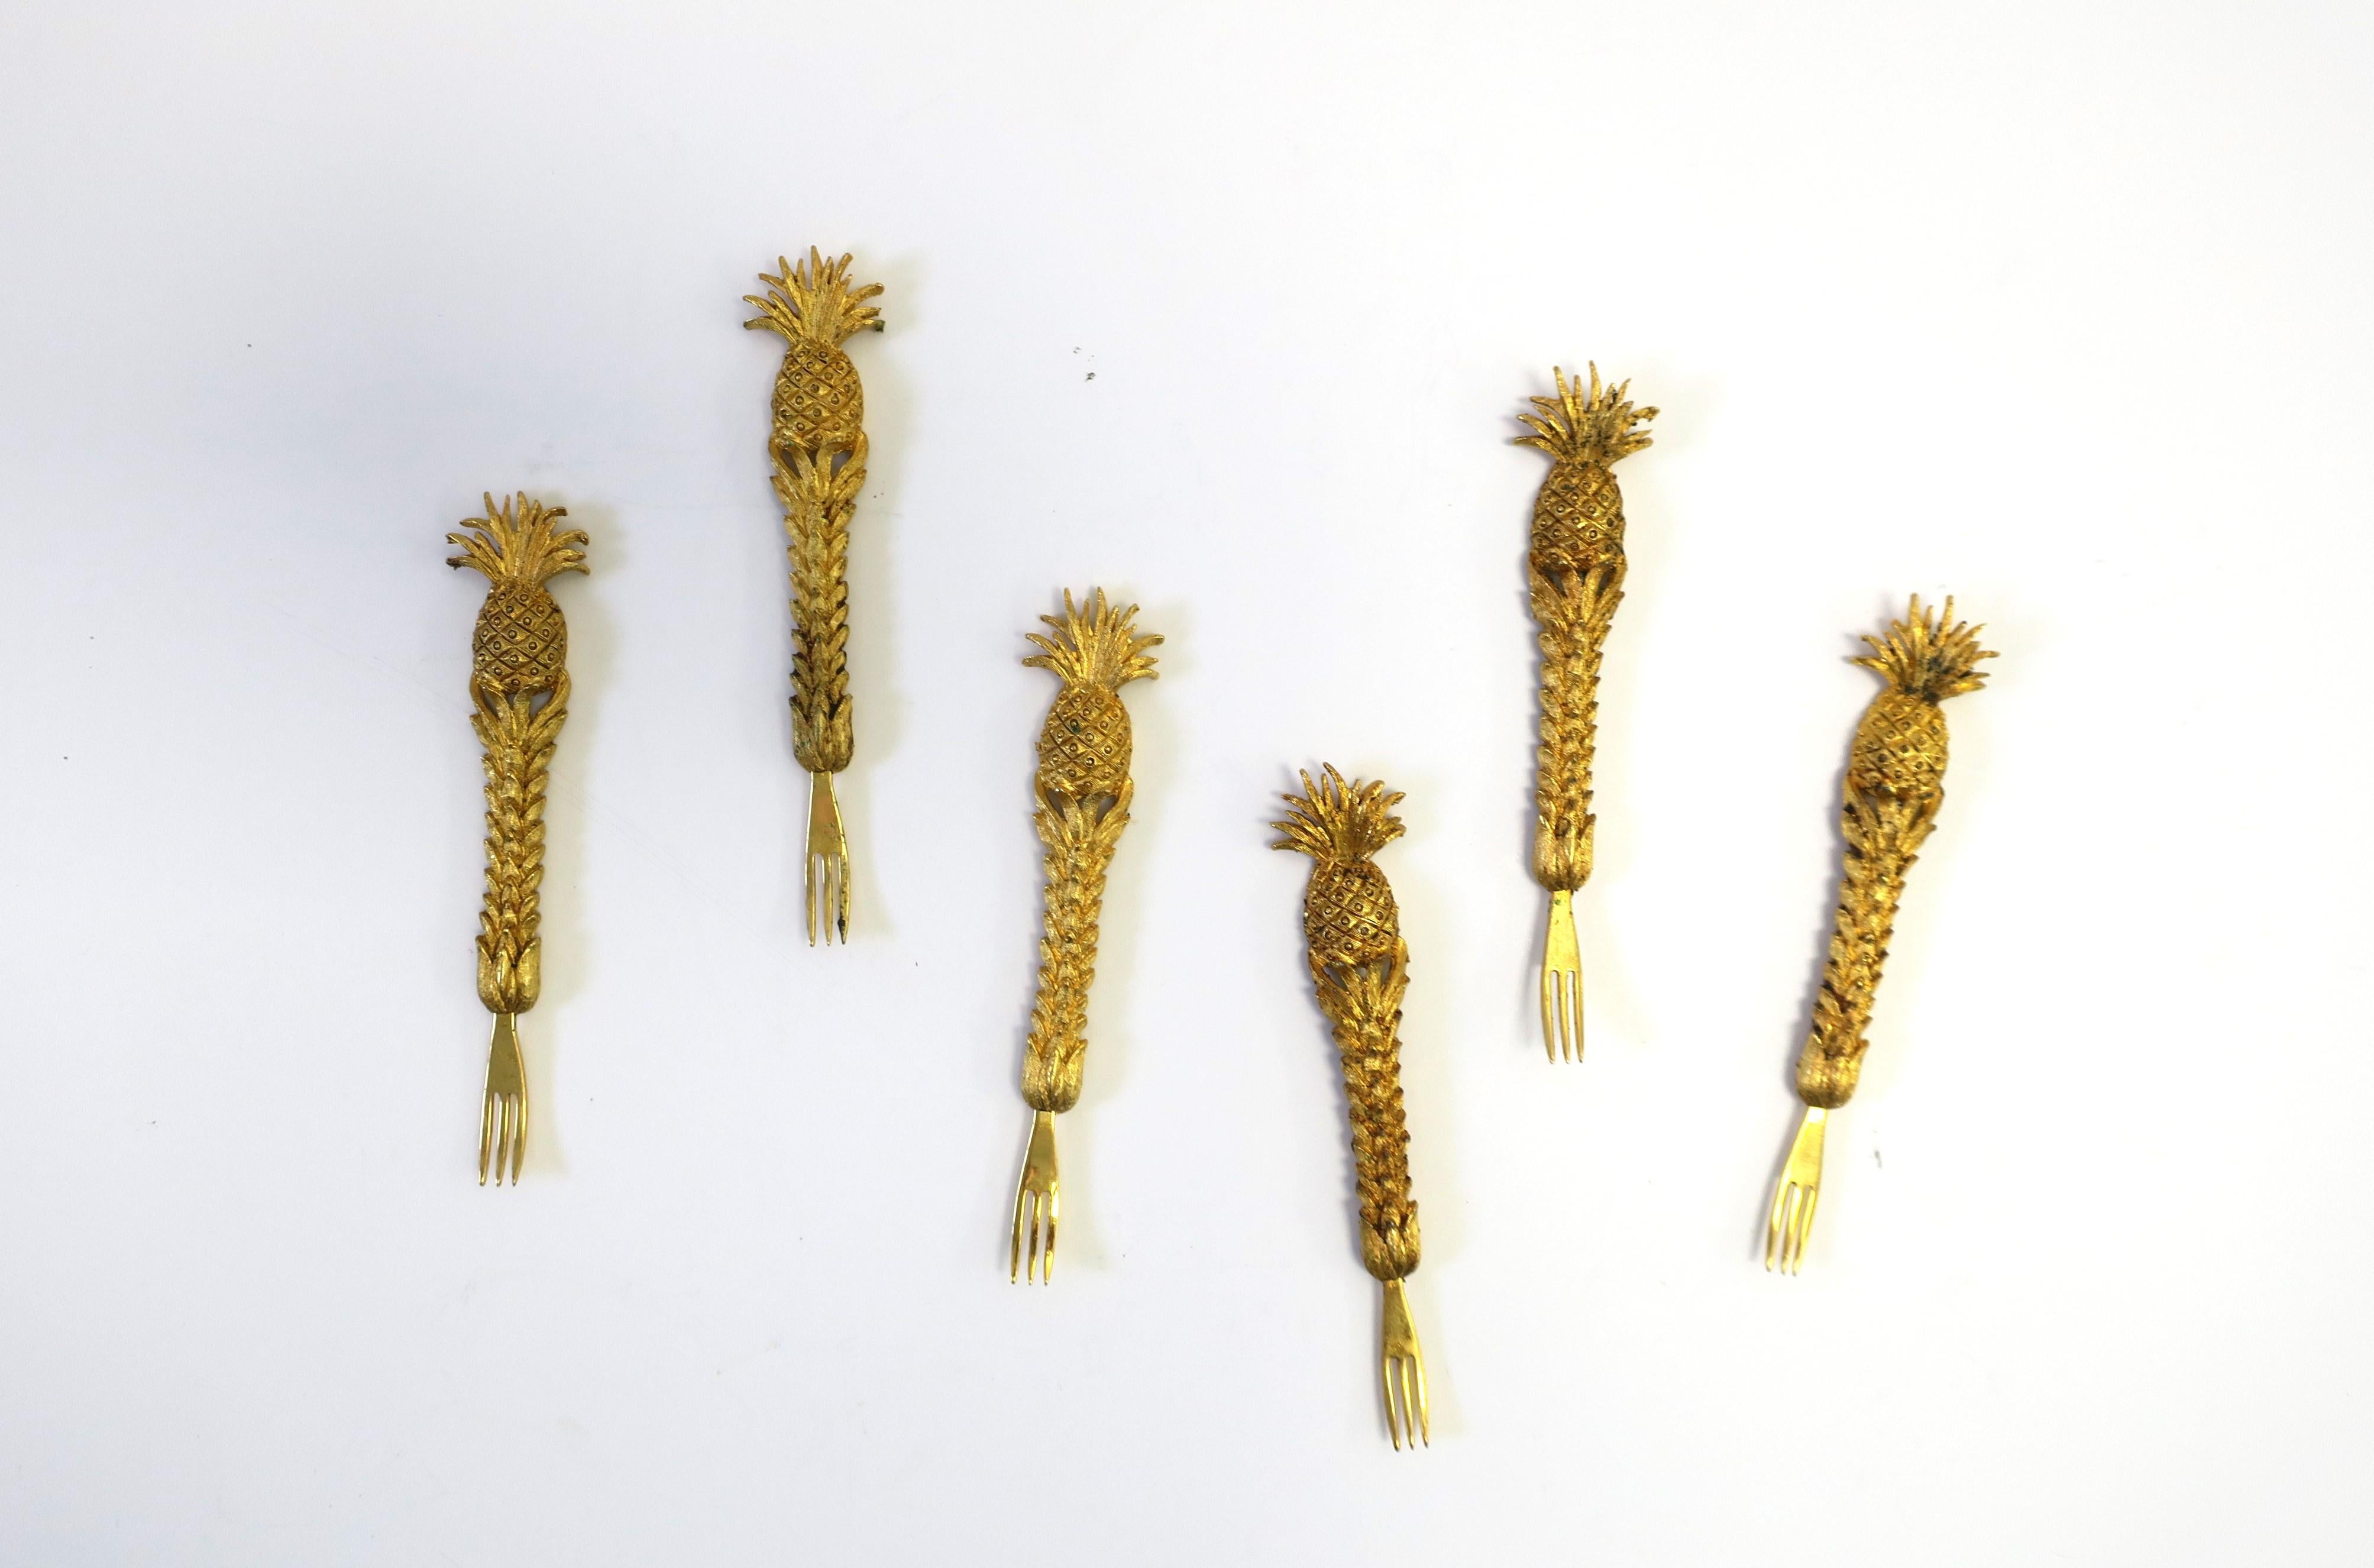 Gold Plated Appetizer Canapé Hor D'oeuvres Forks with Pineapple Design, 1960s For Sale 2